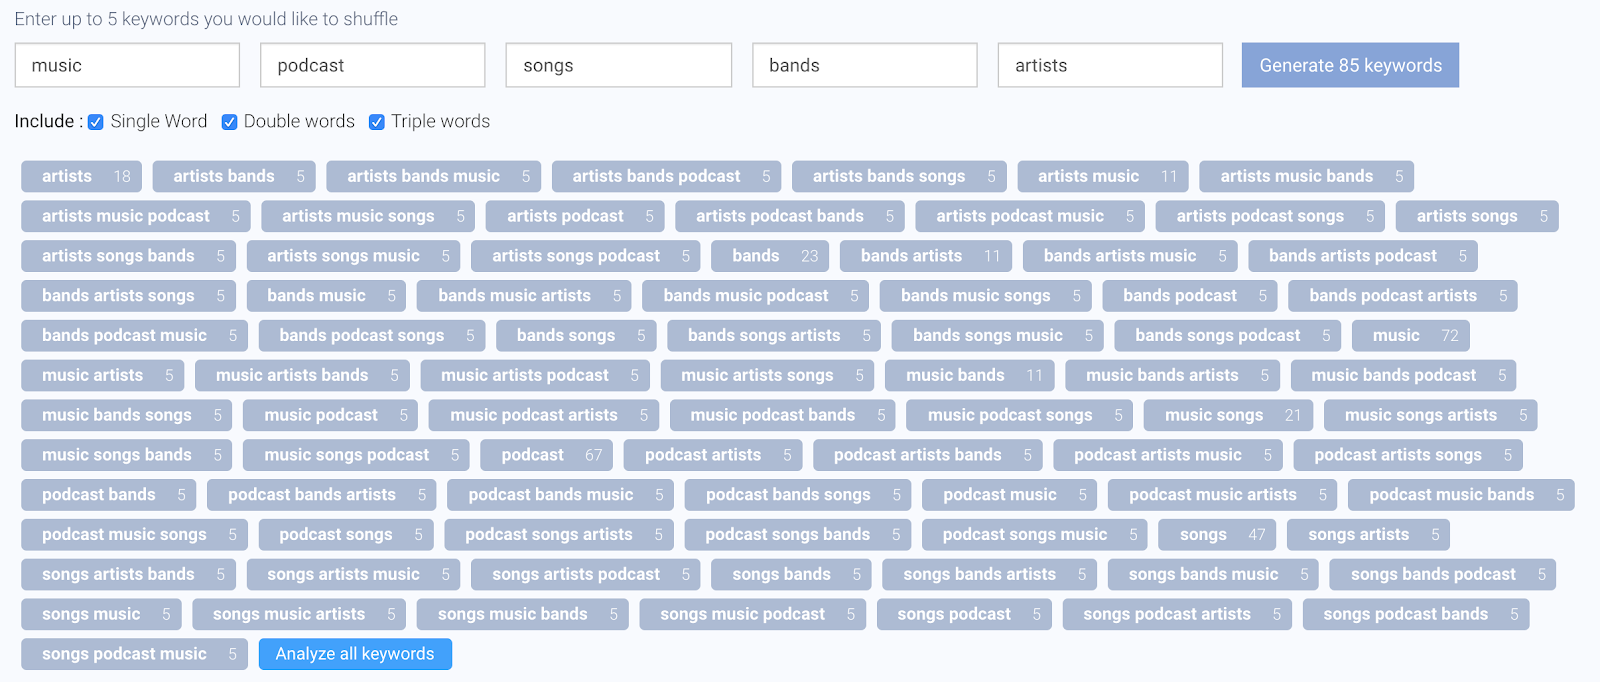 By entering the keywords ‘music’, ‘podcast’, ‘songs’, bands’, and ‘artists’, the Keyword Shuffle Tool has generated 85 long tail keywords and combinations for Spotify (Apple Store - United States).